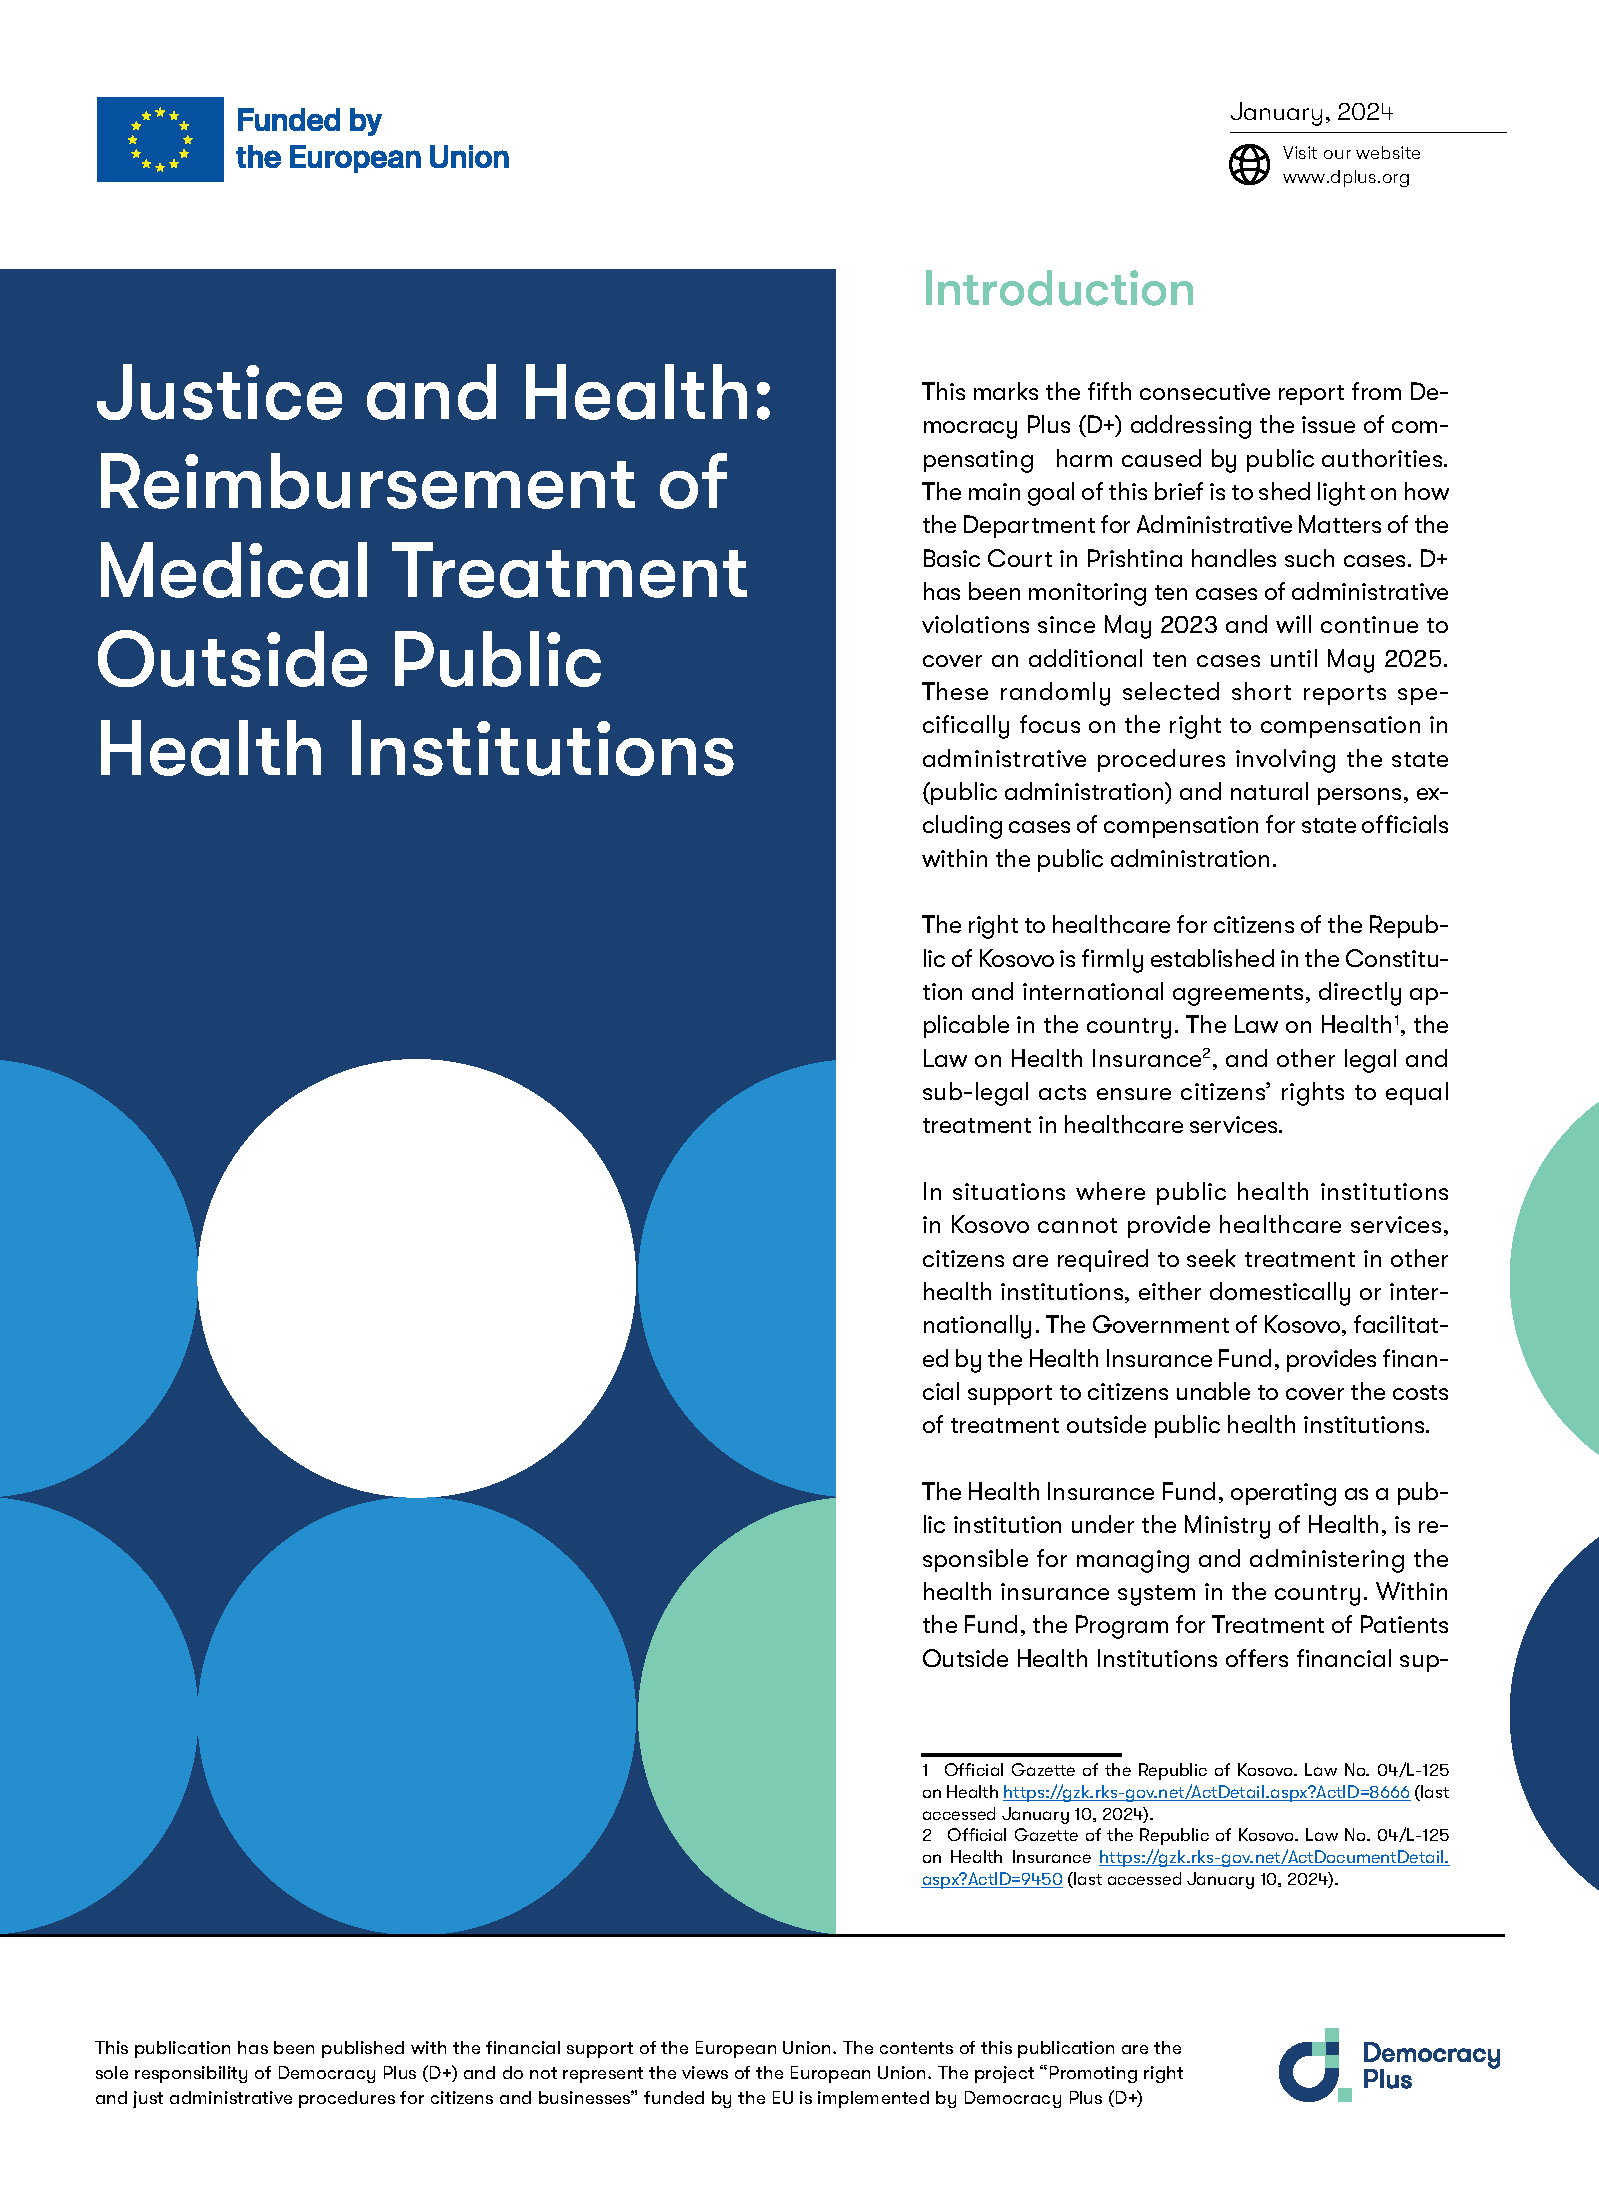 Justice and Health: Reimbursement of Medical Treatment Outside Public Health Institutions